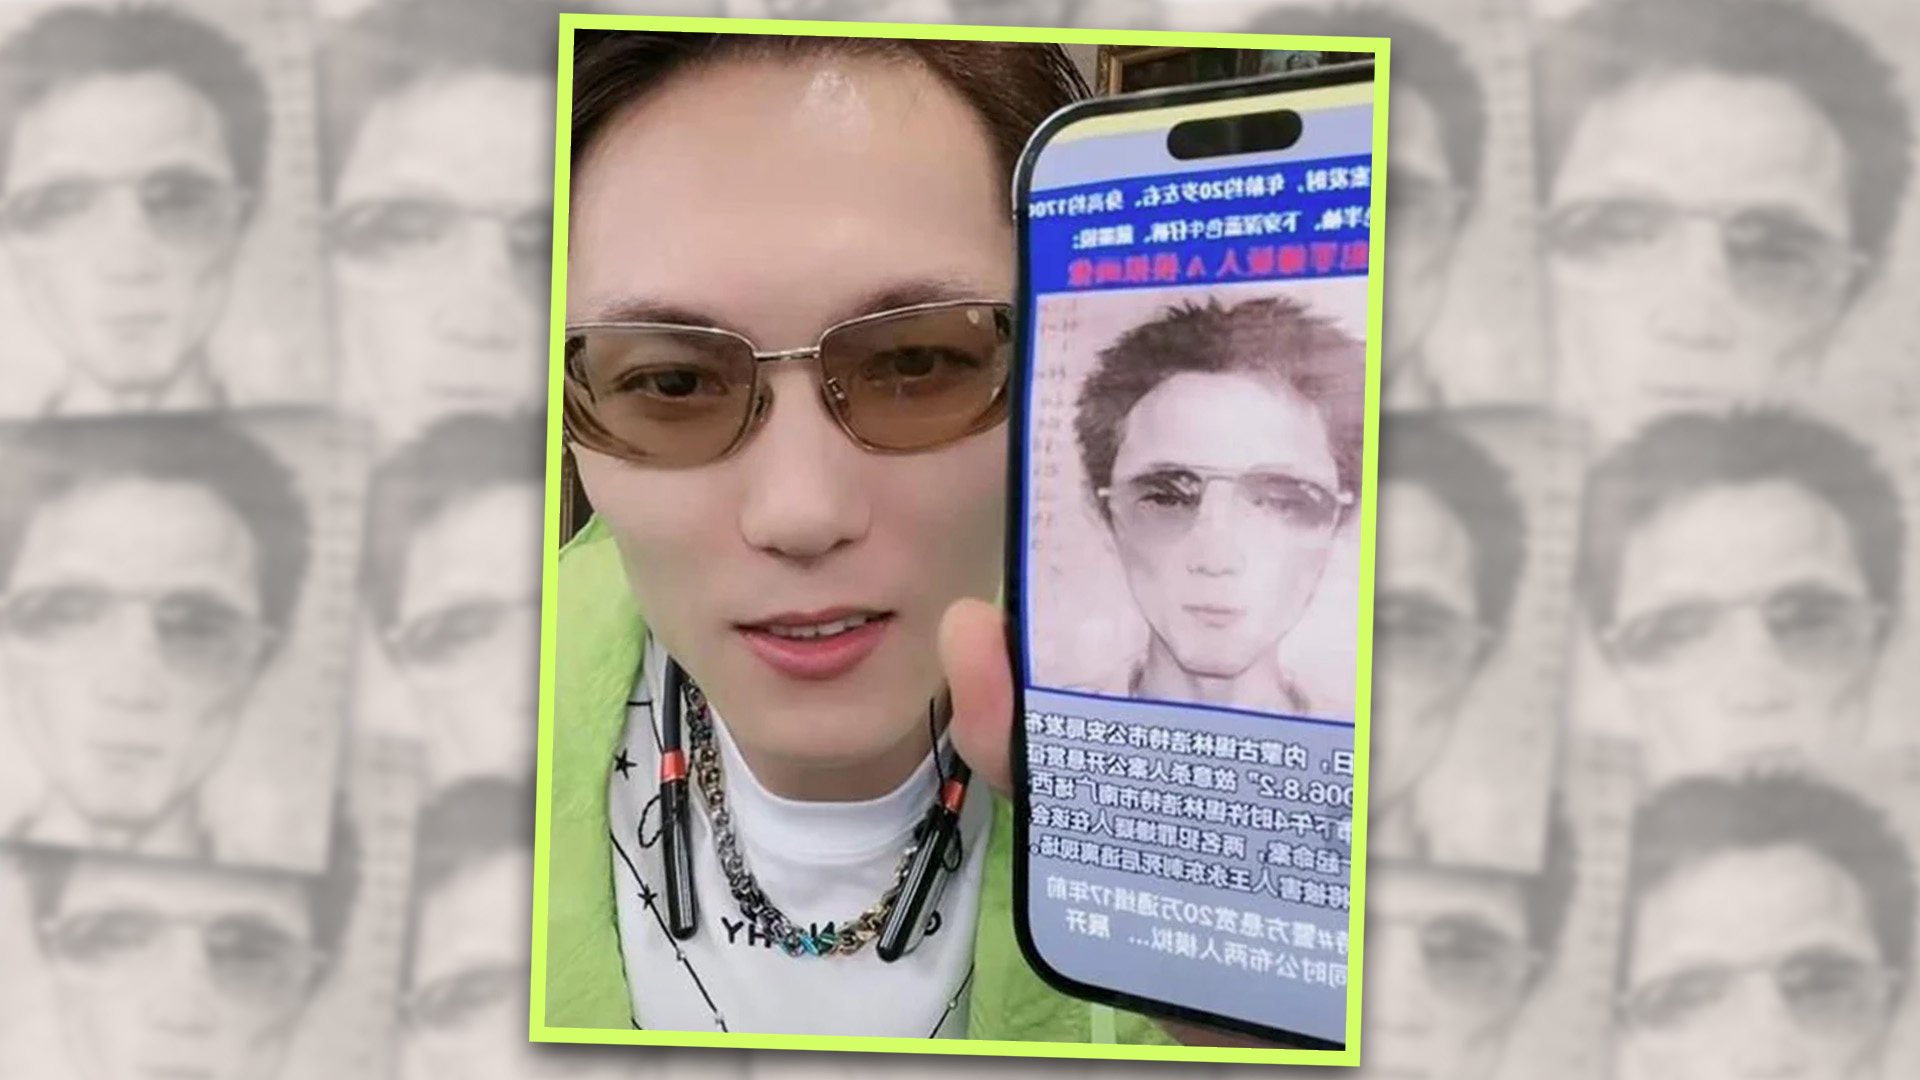 An online influencer in China has been caught up in the hunt for a fugitive from a 2006 murder after some of his followers noticed a resemblance between him and one of the suspects and then made a report to the police. Photo: SCMP composite/Bilibili